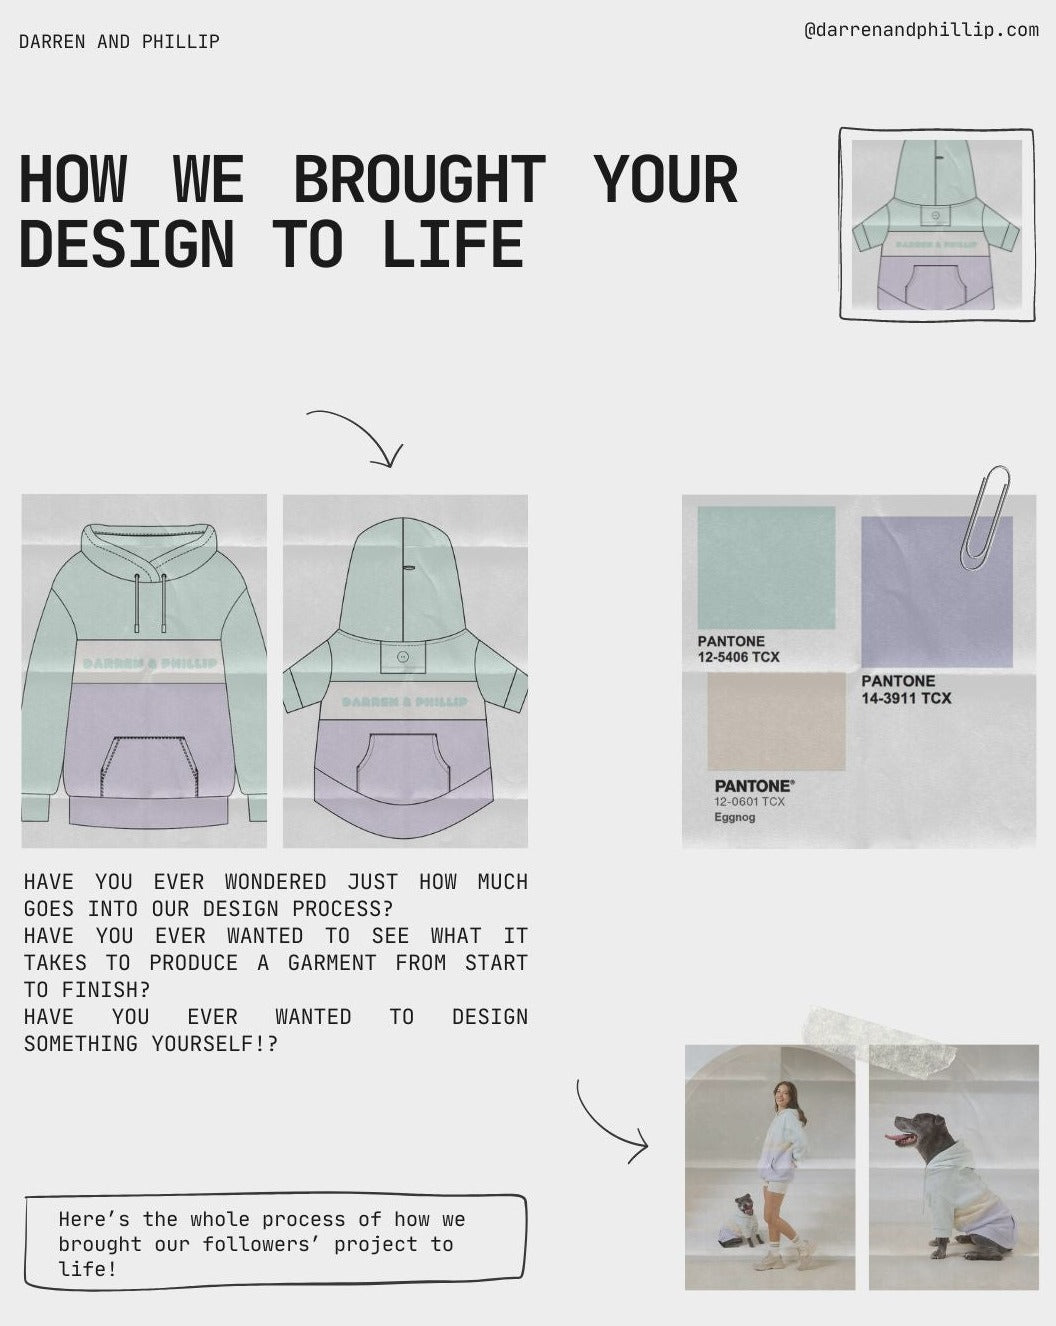 The Design Process at Darren and Phillip.